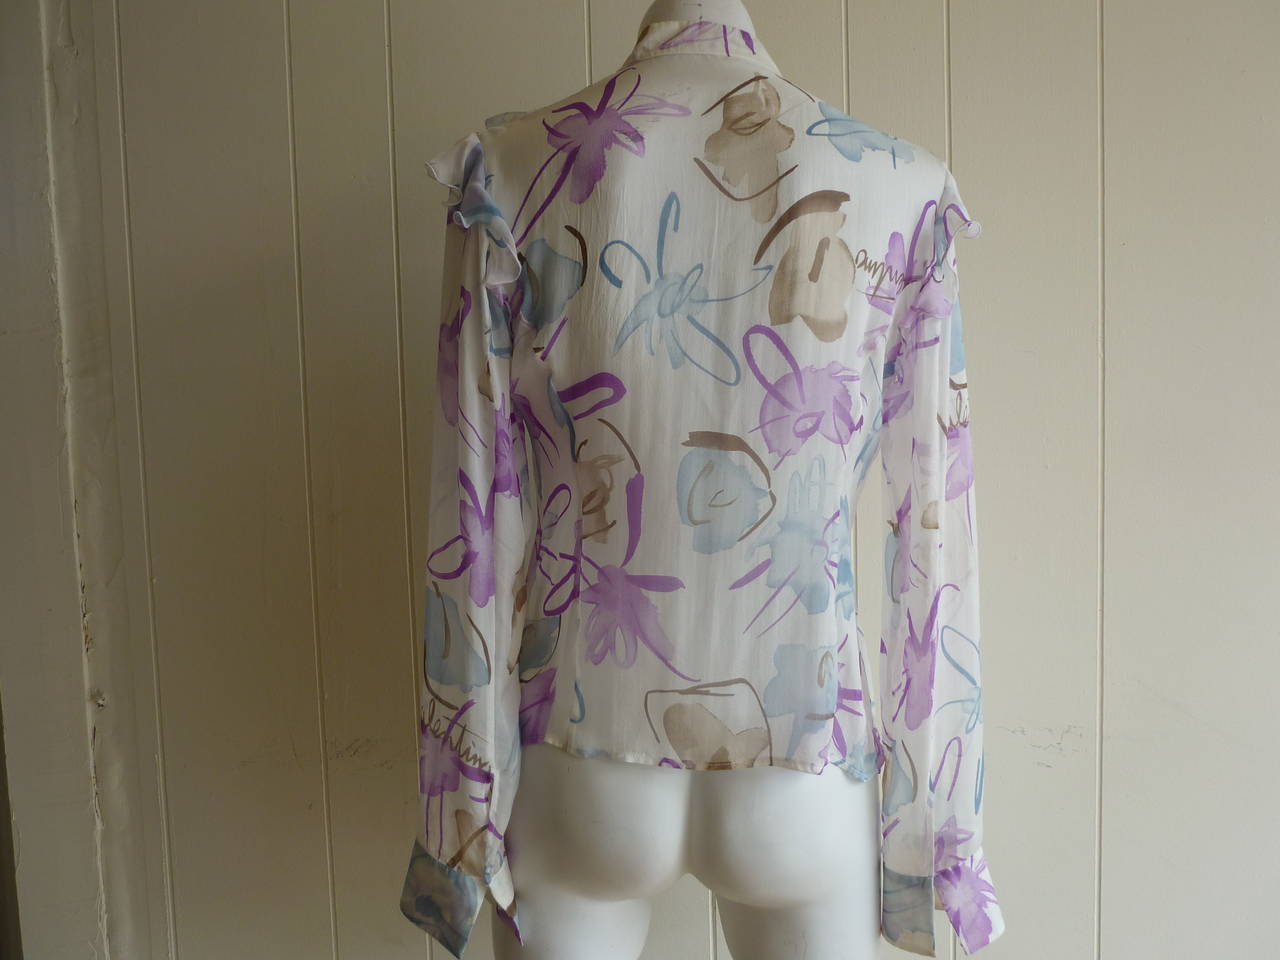 The graphics on this delicate silk blouse are like paint strokes. The background is white with splatters in lilac, teal and browns from bronze to light beige.  There are ruffle on the shoulders and the front of the blouse, and it is signed